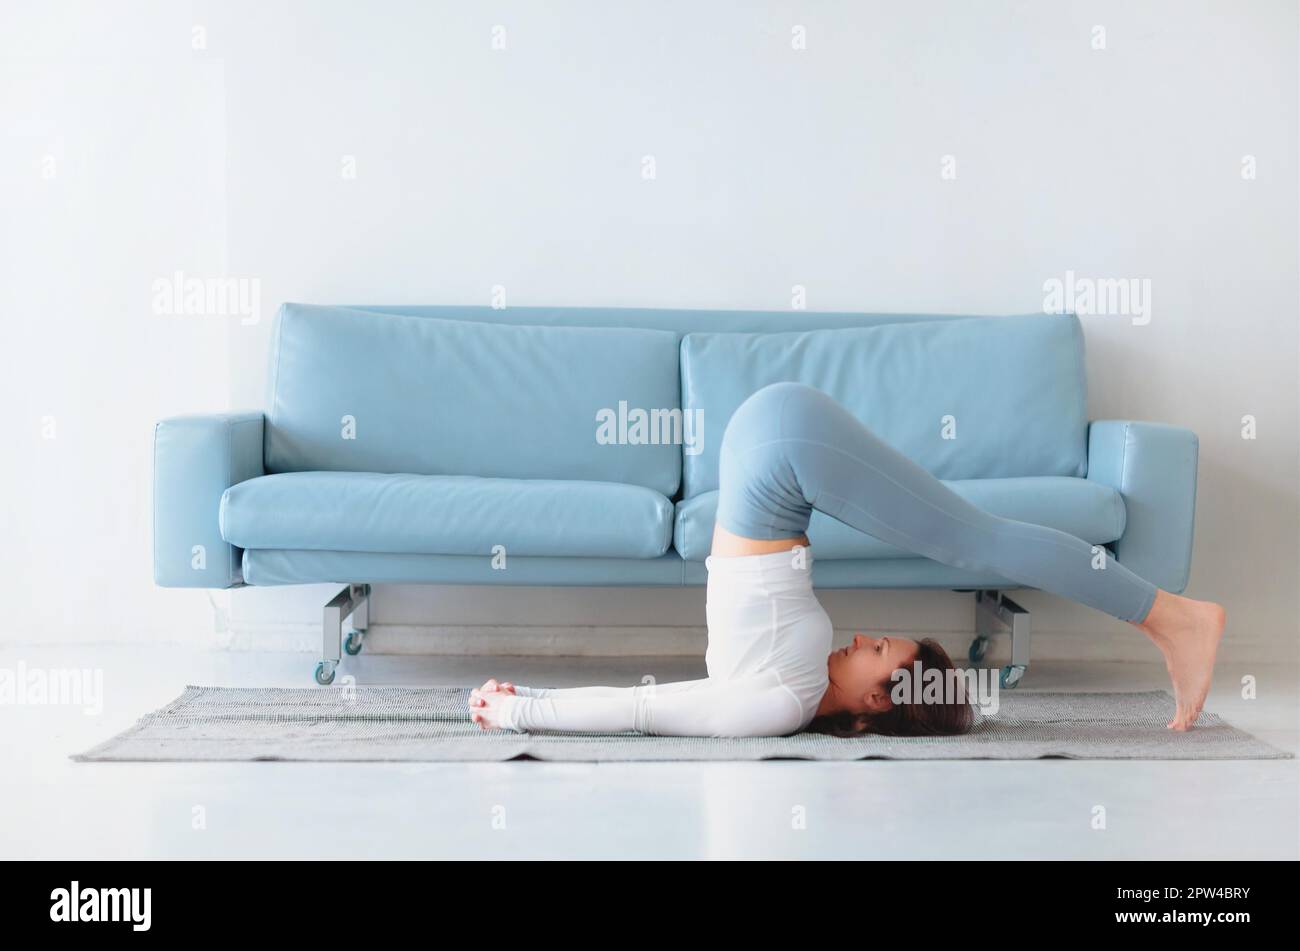 Slim female in sportswear bending aside while practicing yoga near sofa at home Stock Photo